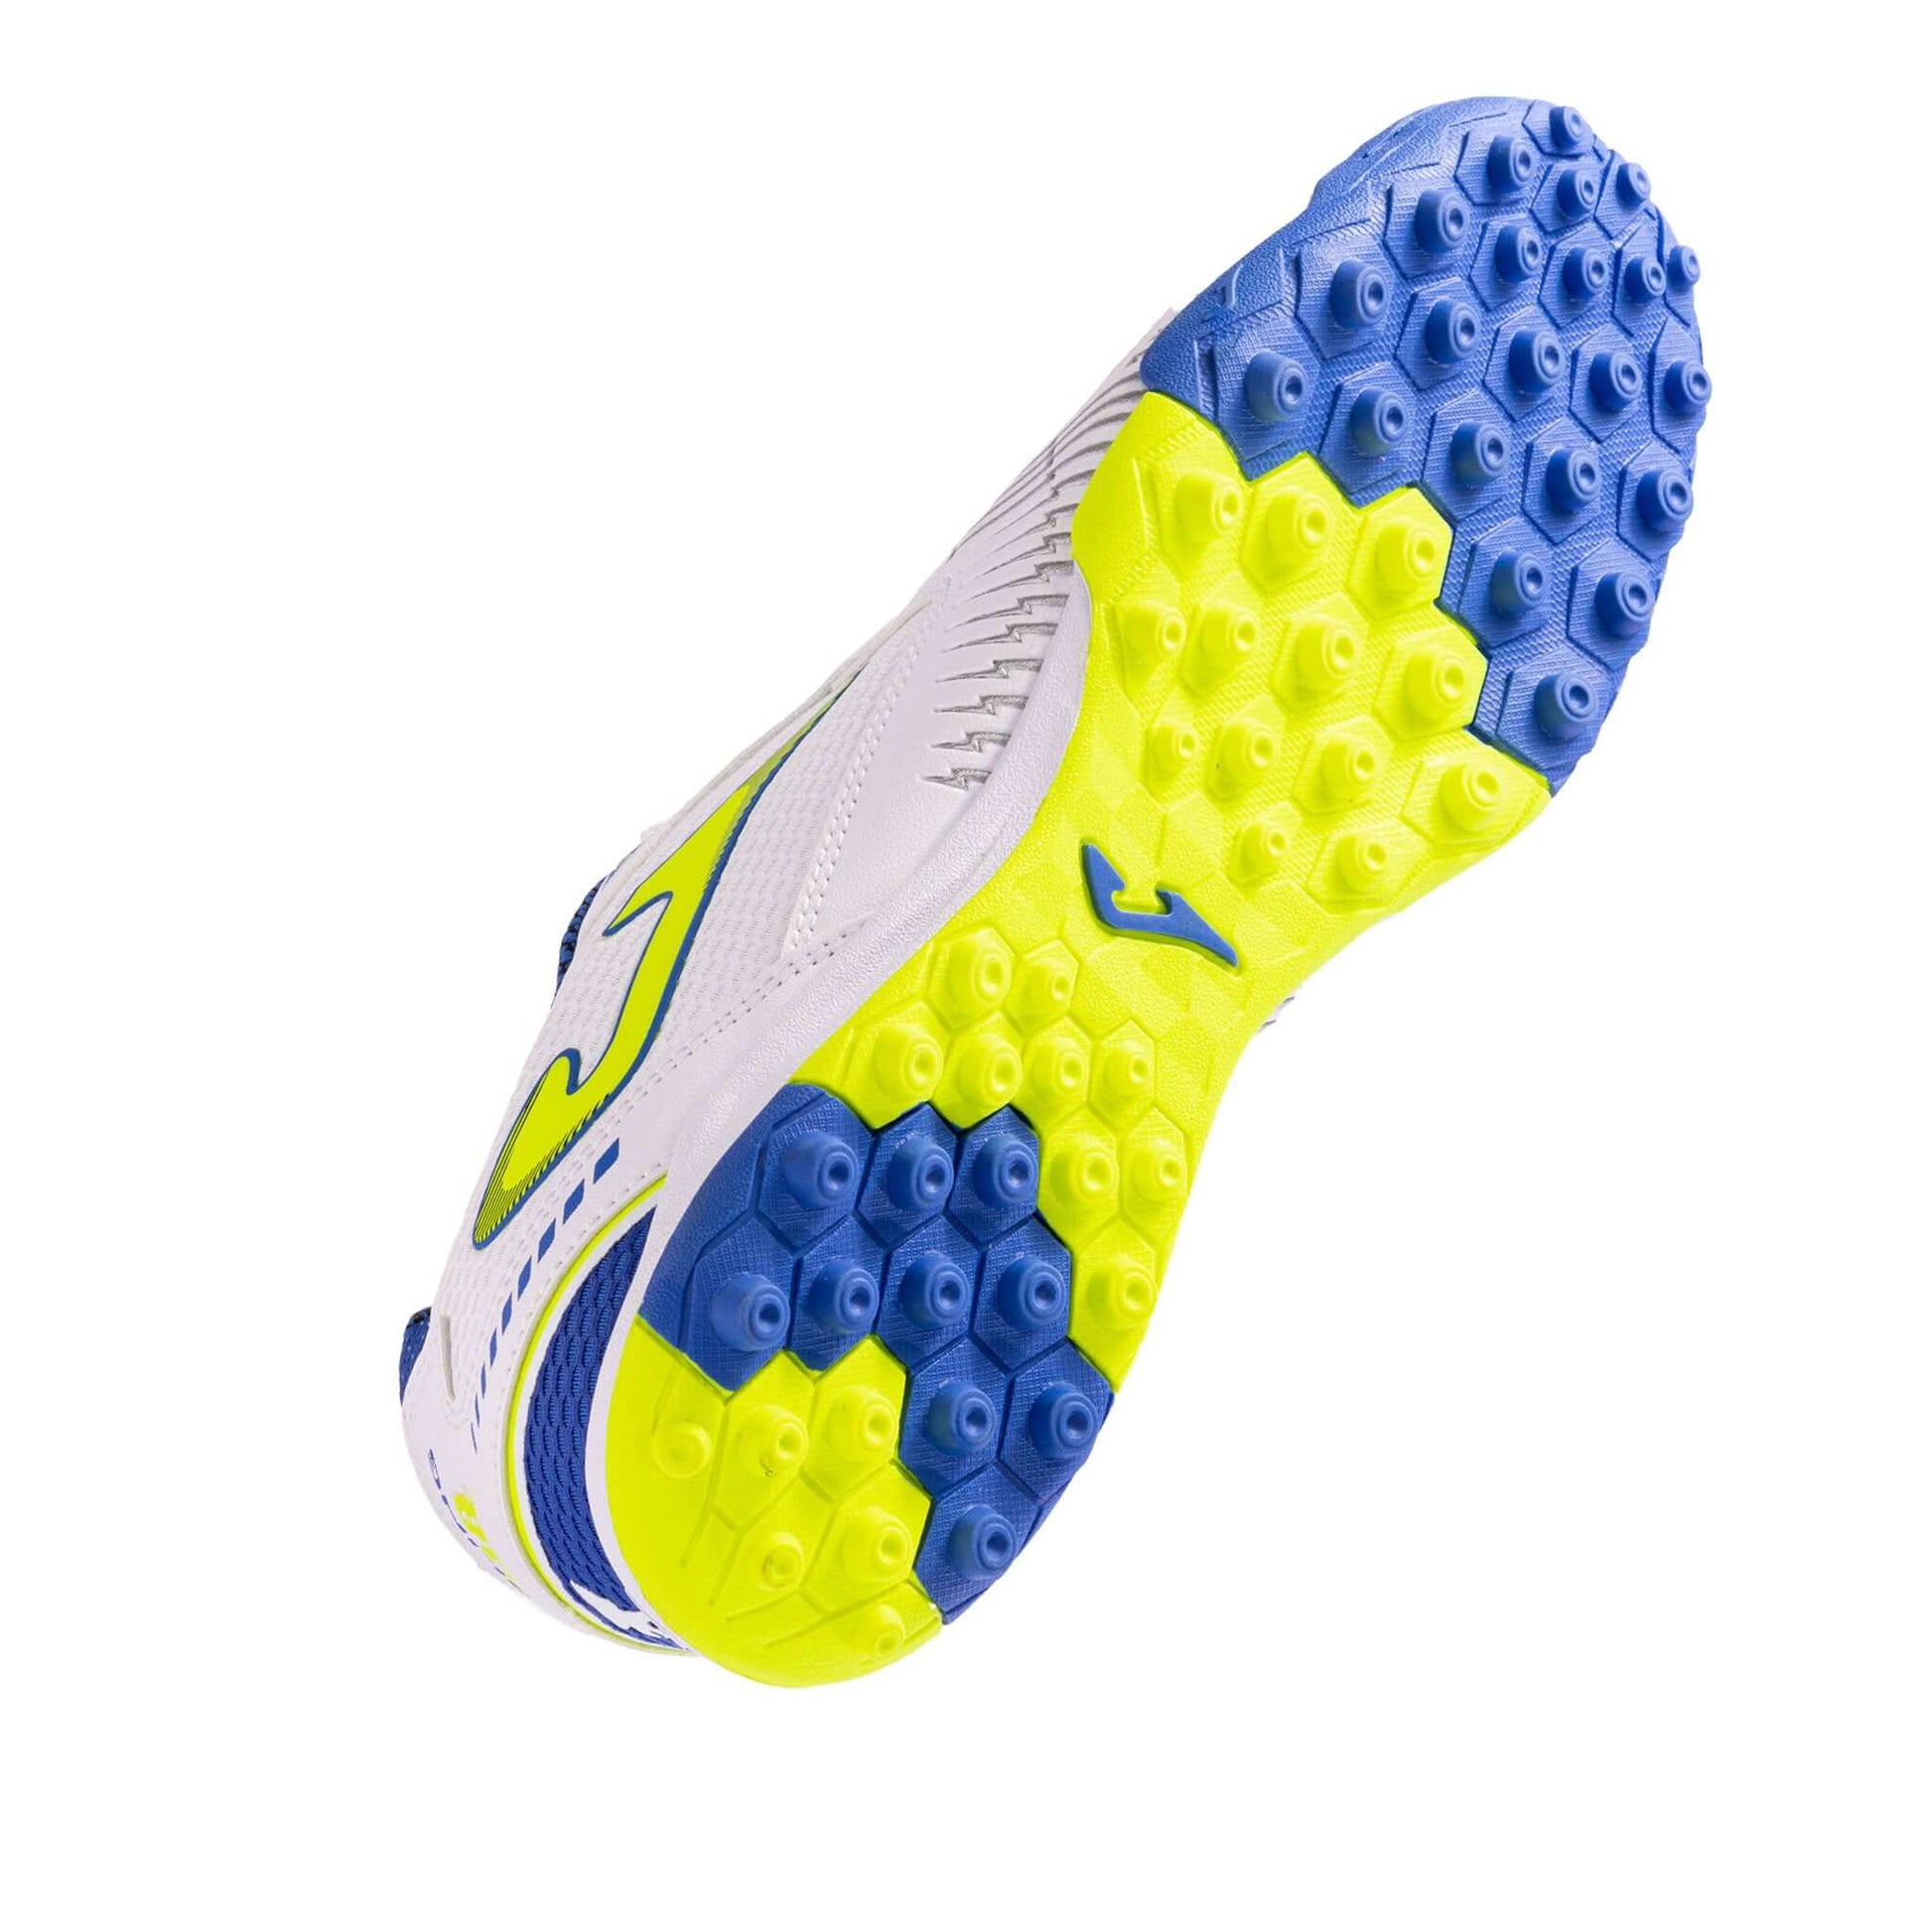 Dribling 23 Turf Soccer Shoes | EvangelistaSports.com | Canada's Premiere Soccer Store